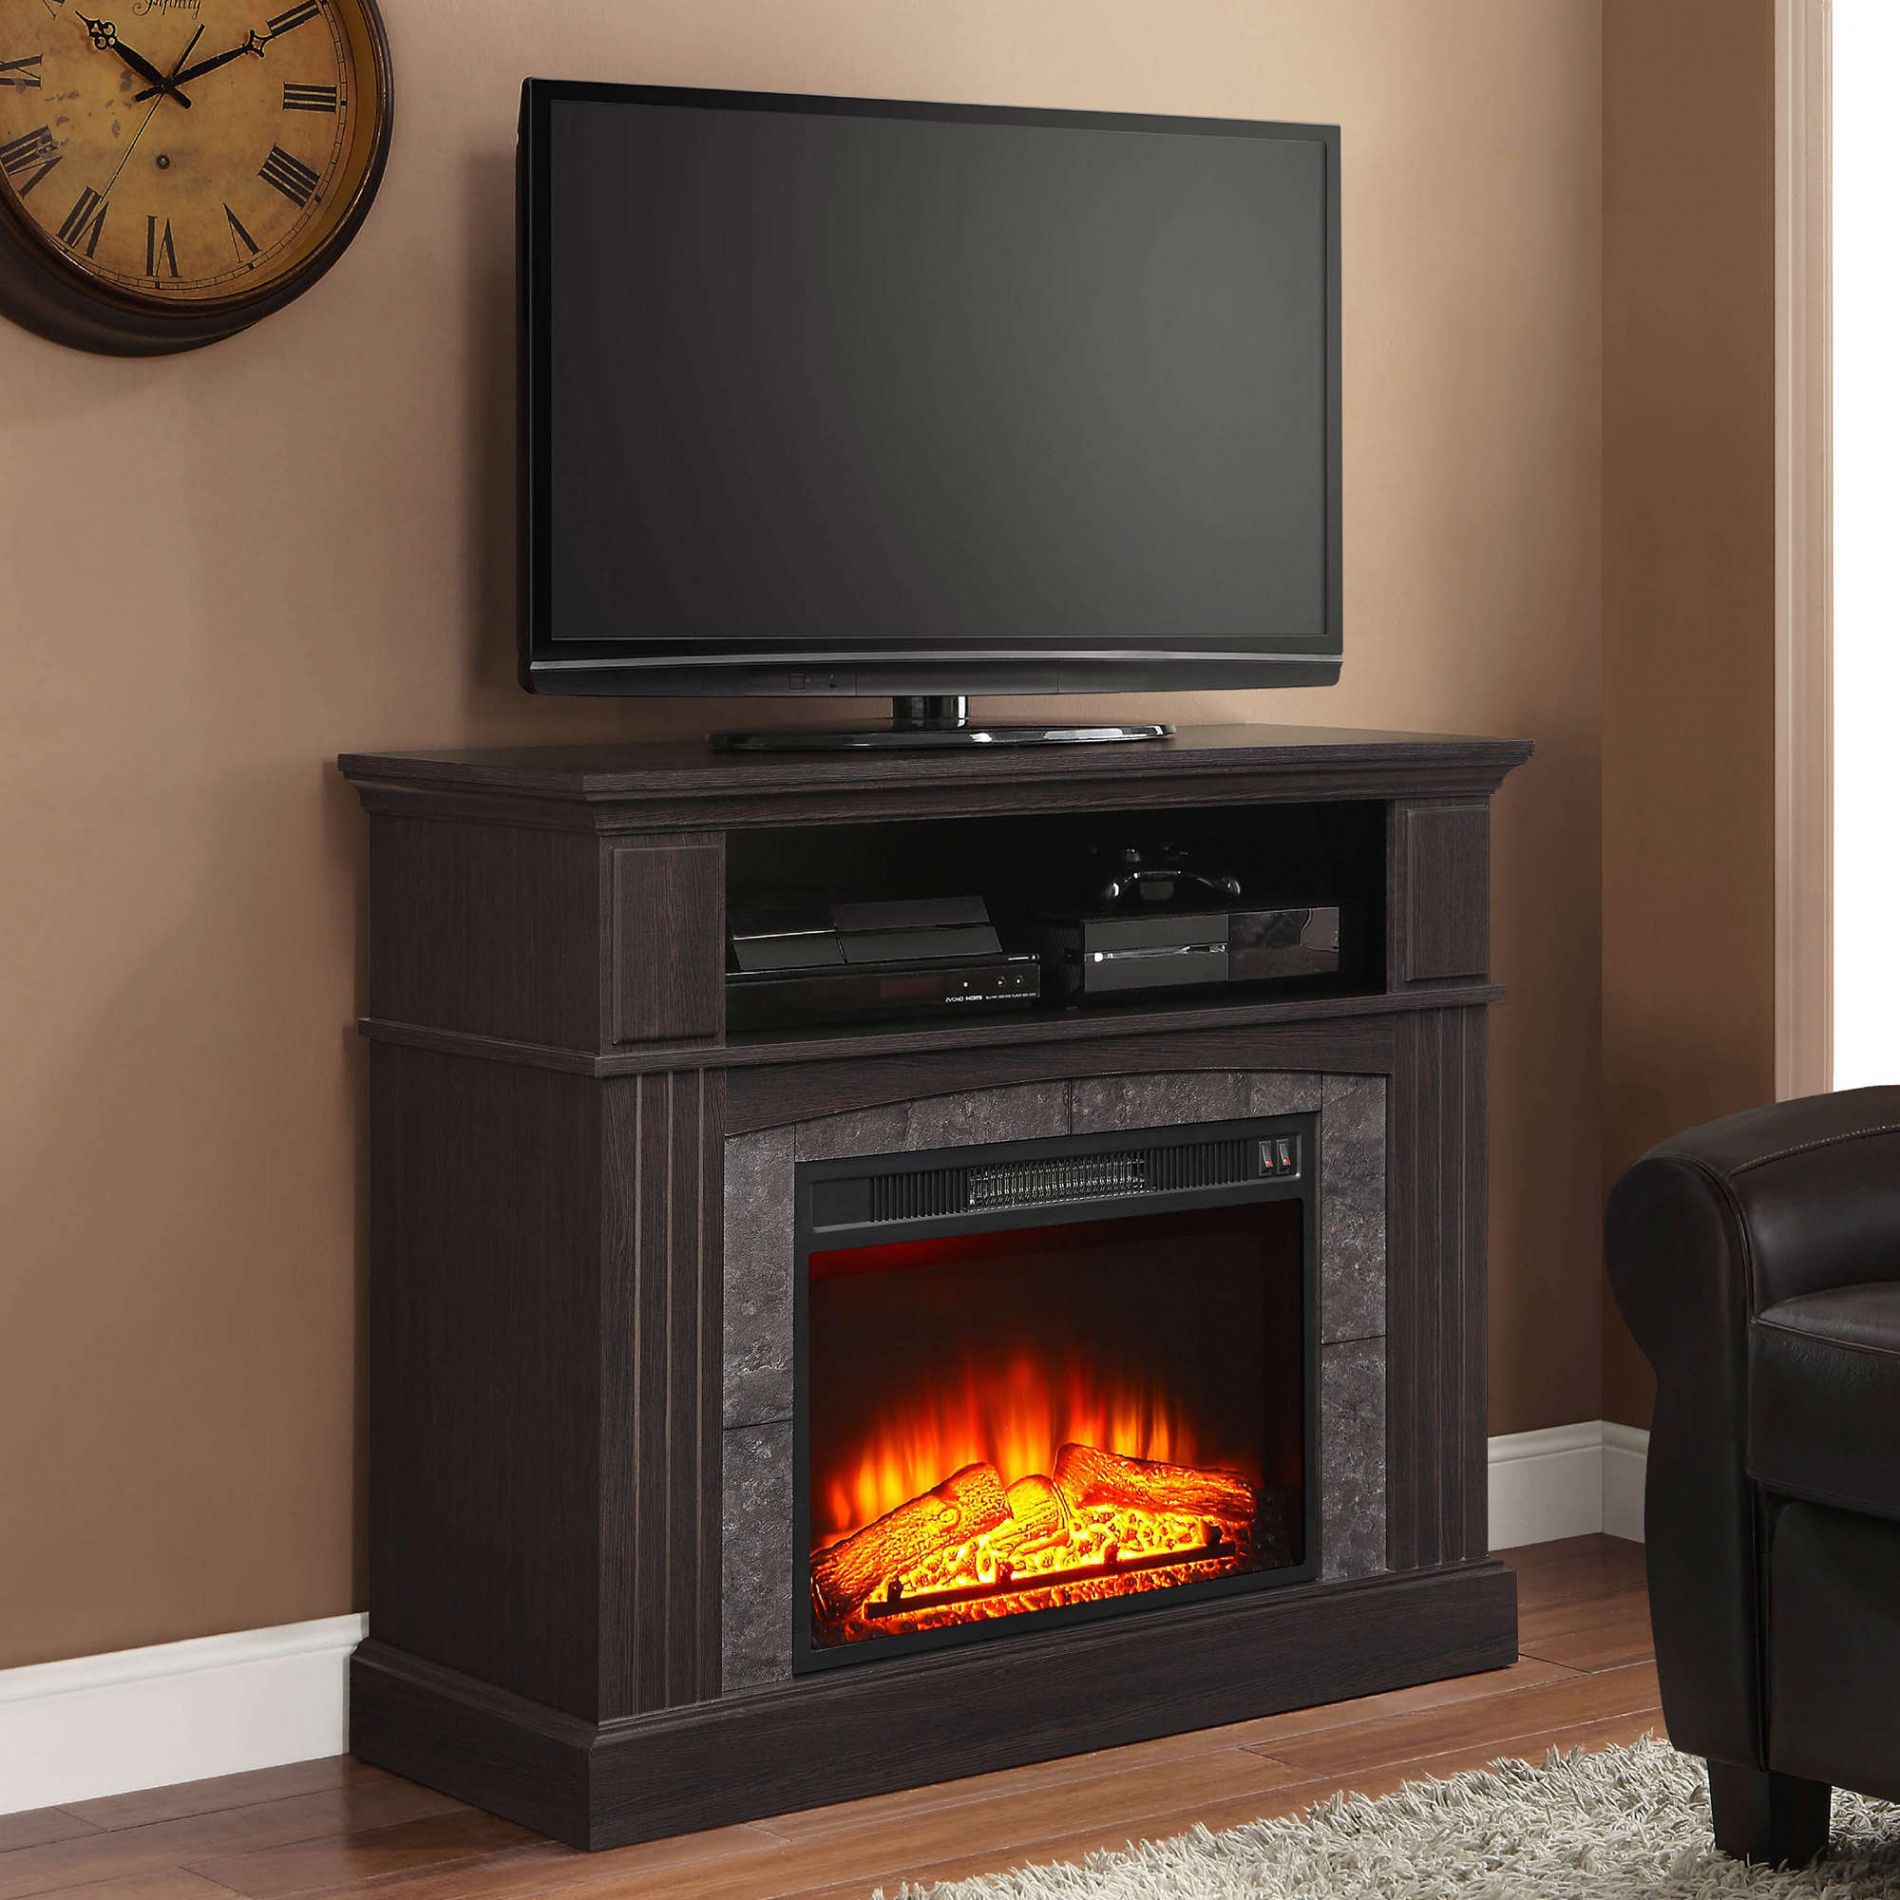 Unique Whalen Media Fireplace Console | Ch20 Webmaster In Whalen Shelf Tv Stands With Floater Mount In Weathered Dark Pine Finish (View 14 of 15)